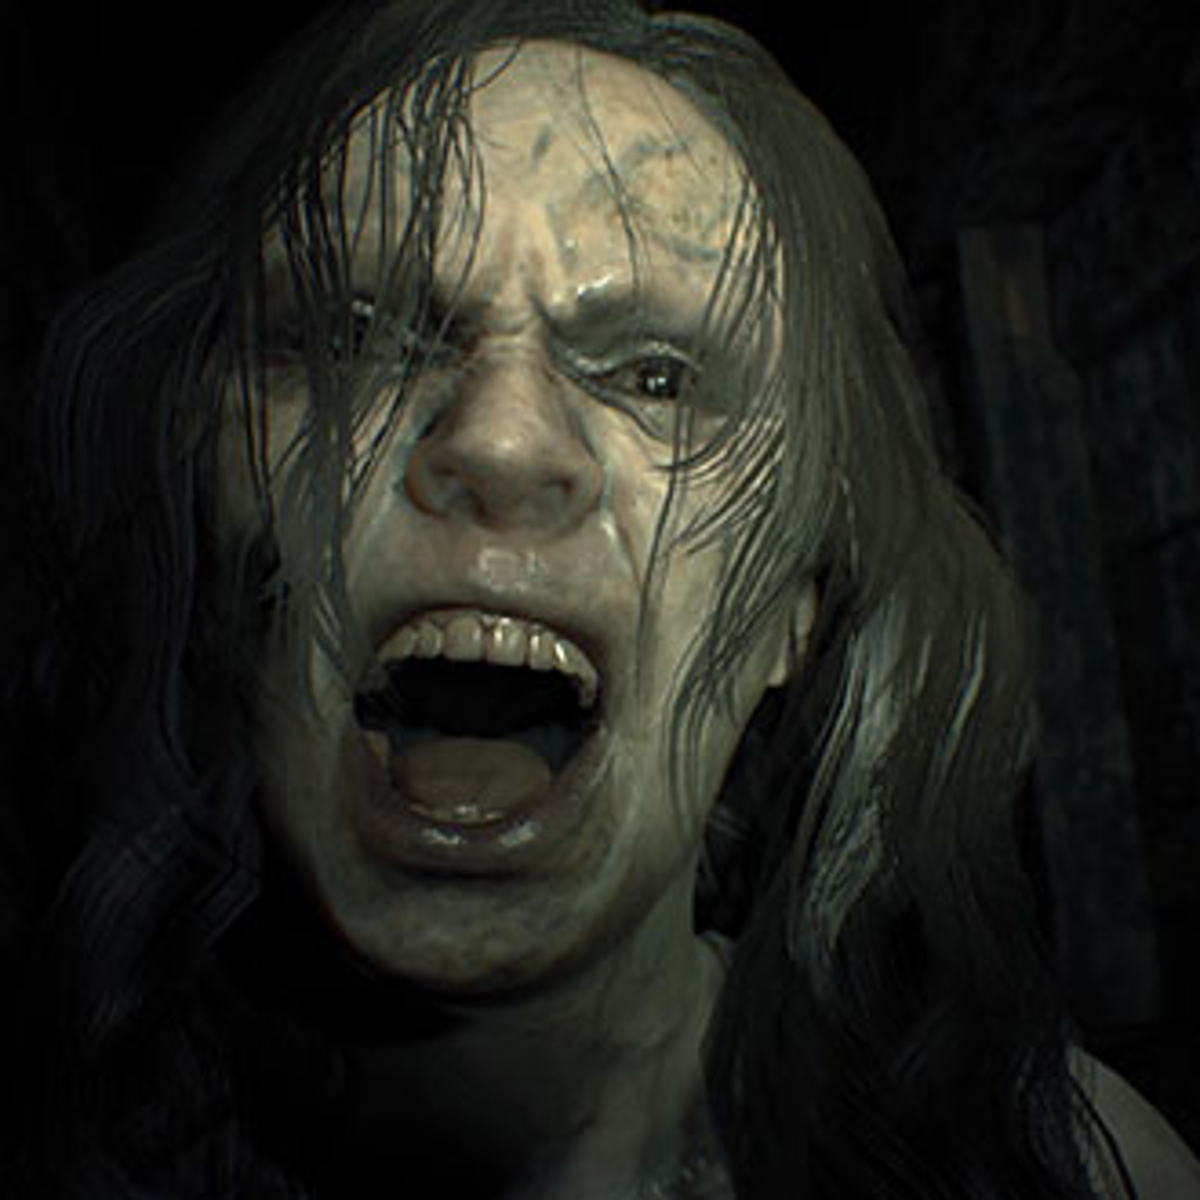 Resident Evil 7 spoilers review